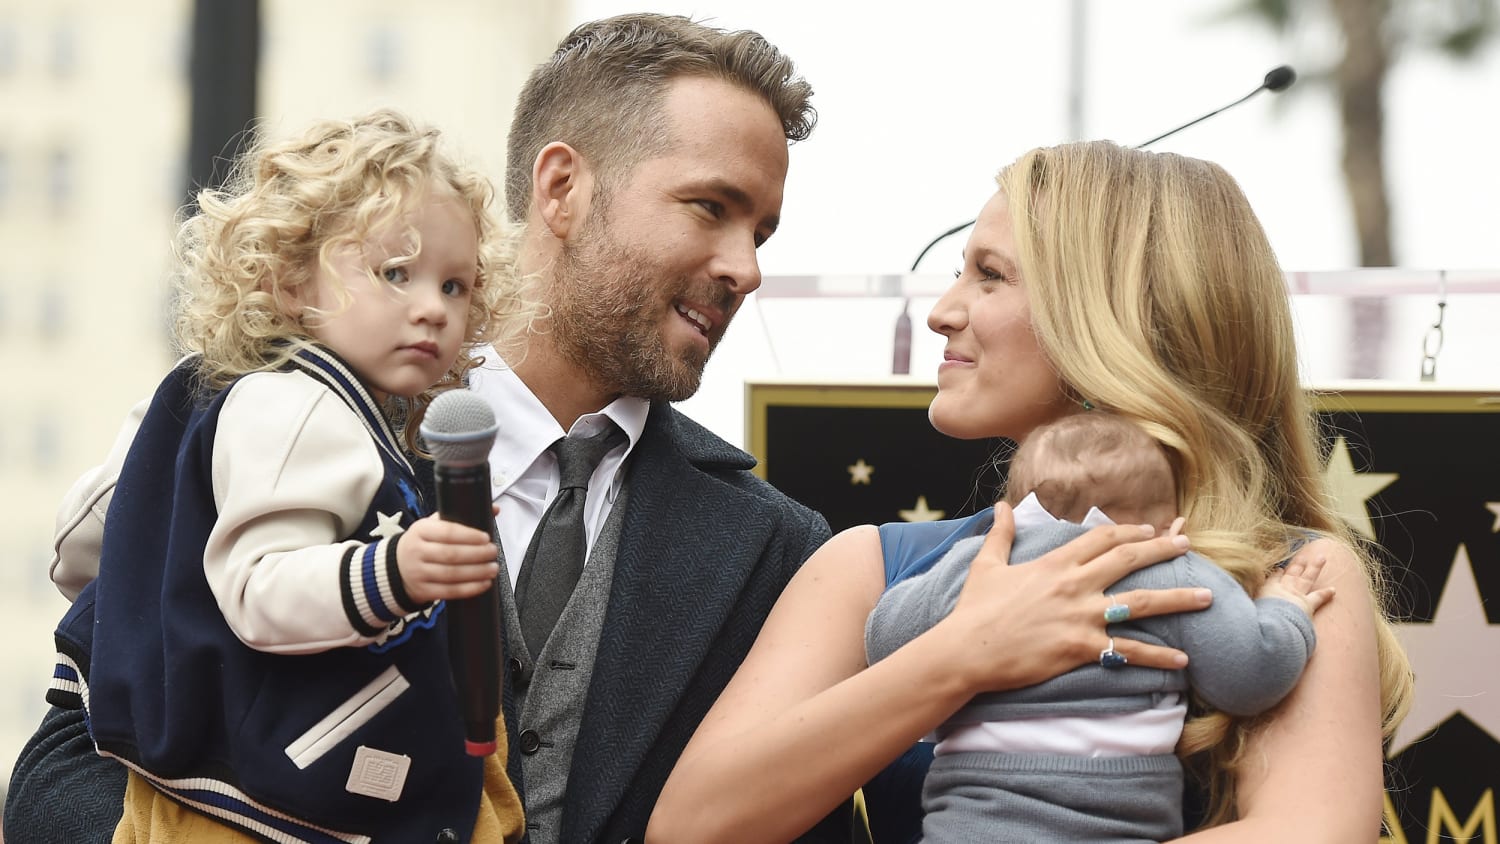 Ryan Reynolds opens up about anxiety, says Blake Lively keeps him 'sane' - TODAY.com2500 x 1407